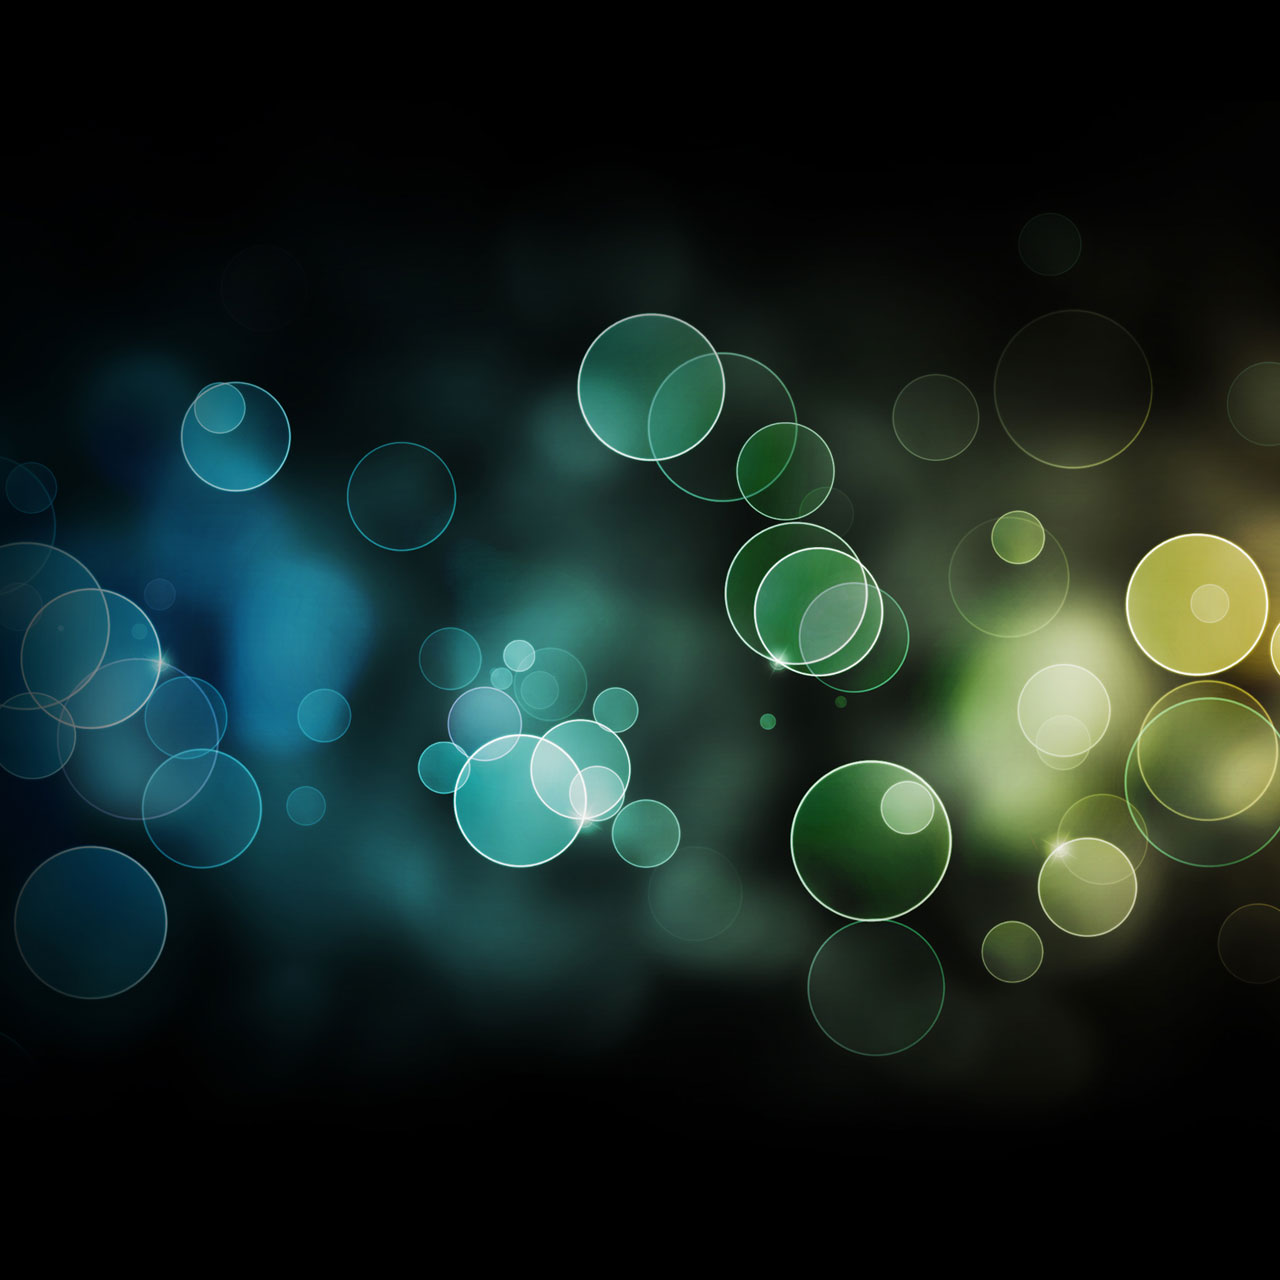 Abstract Bubbles Wallpaper - 17 Inch Laptop Background - HD Wallpaper 